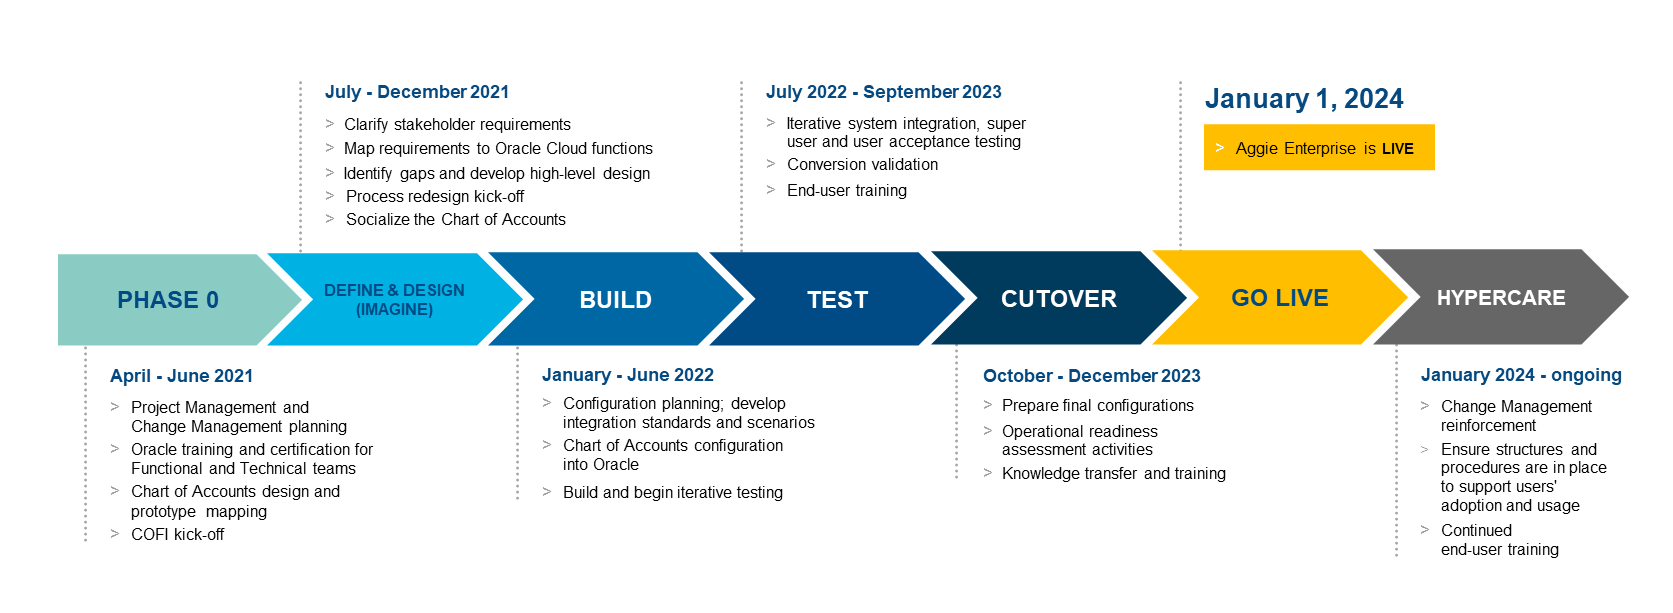 Aggie Enterprise project phases timeline